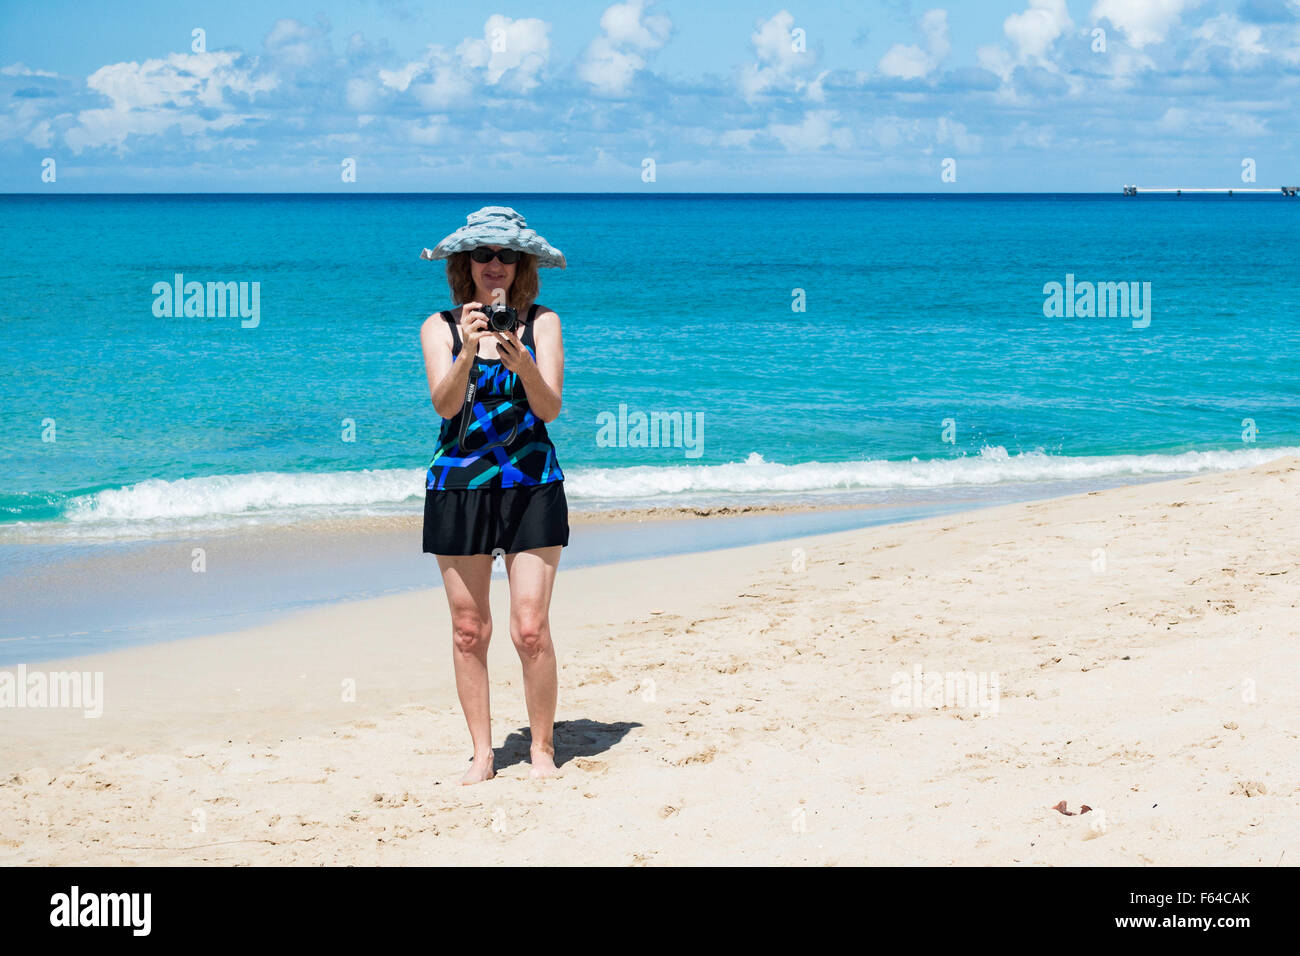 A 50 year old Caucasian woman takes pictures on the beach of St. Croix, U.S. Virgin Islands. Stock Photo